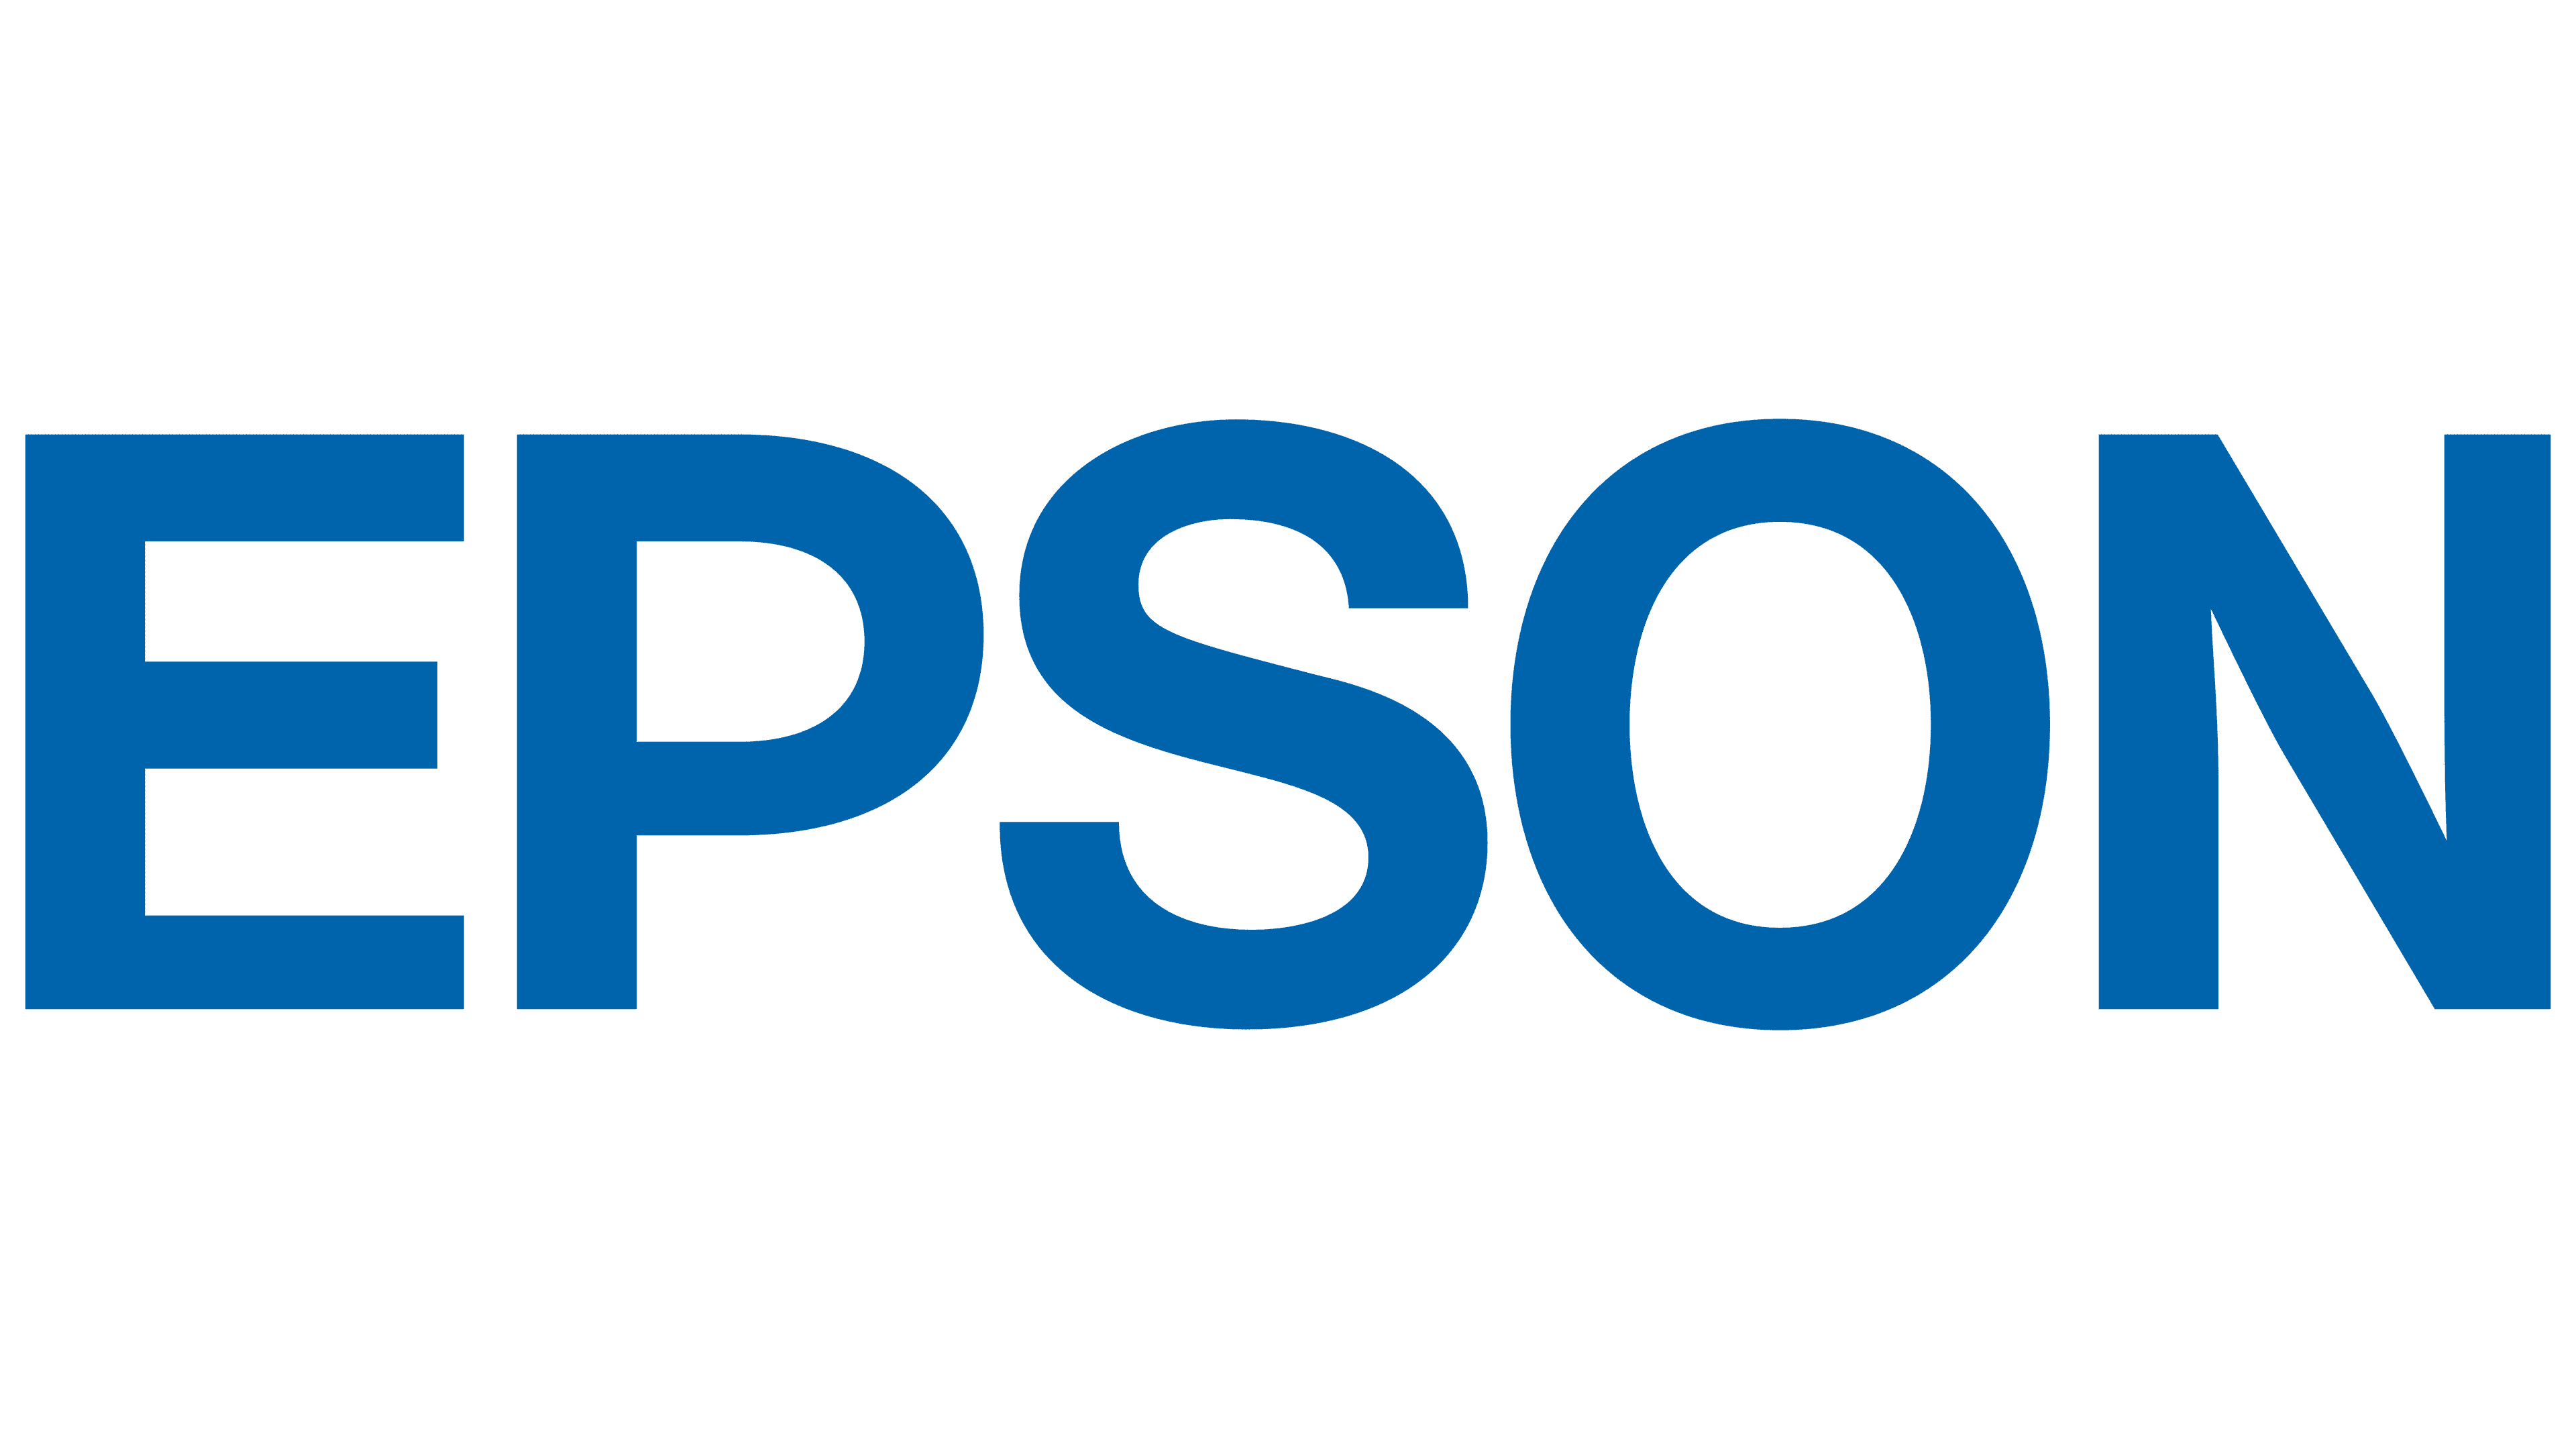 our robotic provider - epson